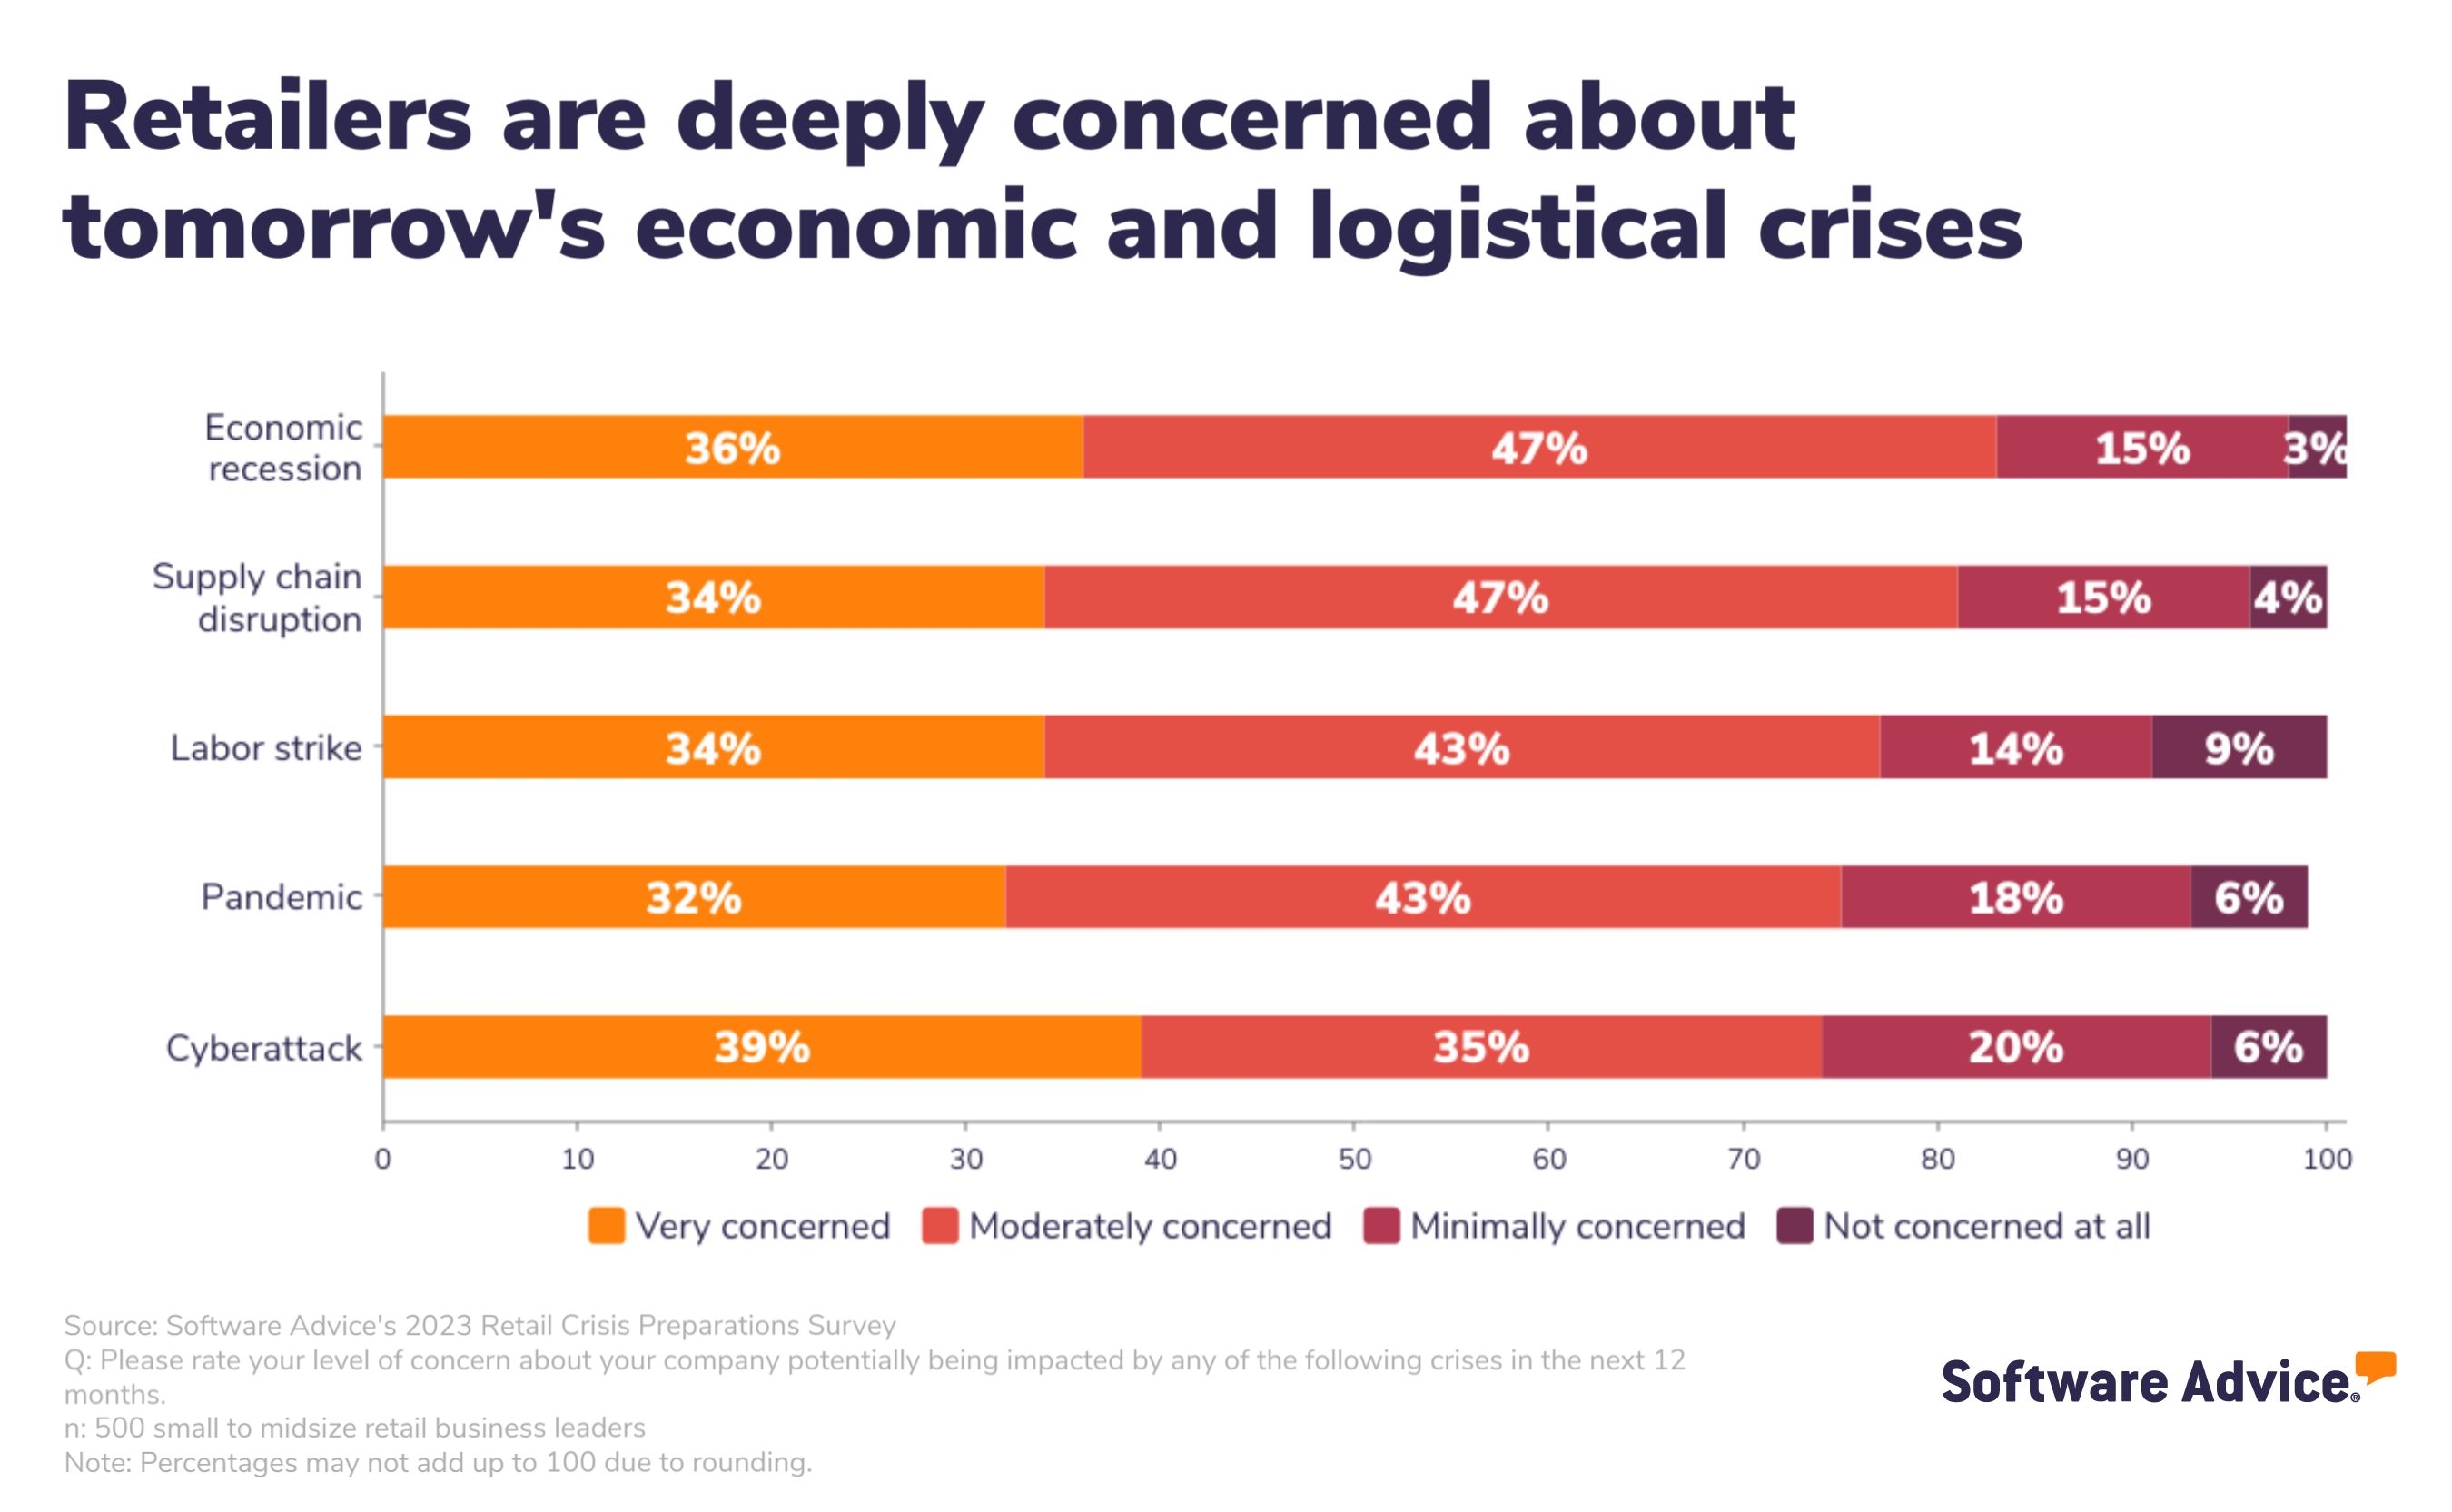 Bar chart showing how concerned retailers are about potential crises affecting their businesses.